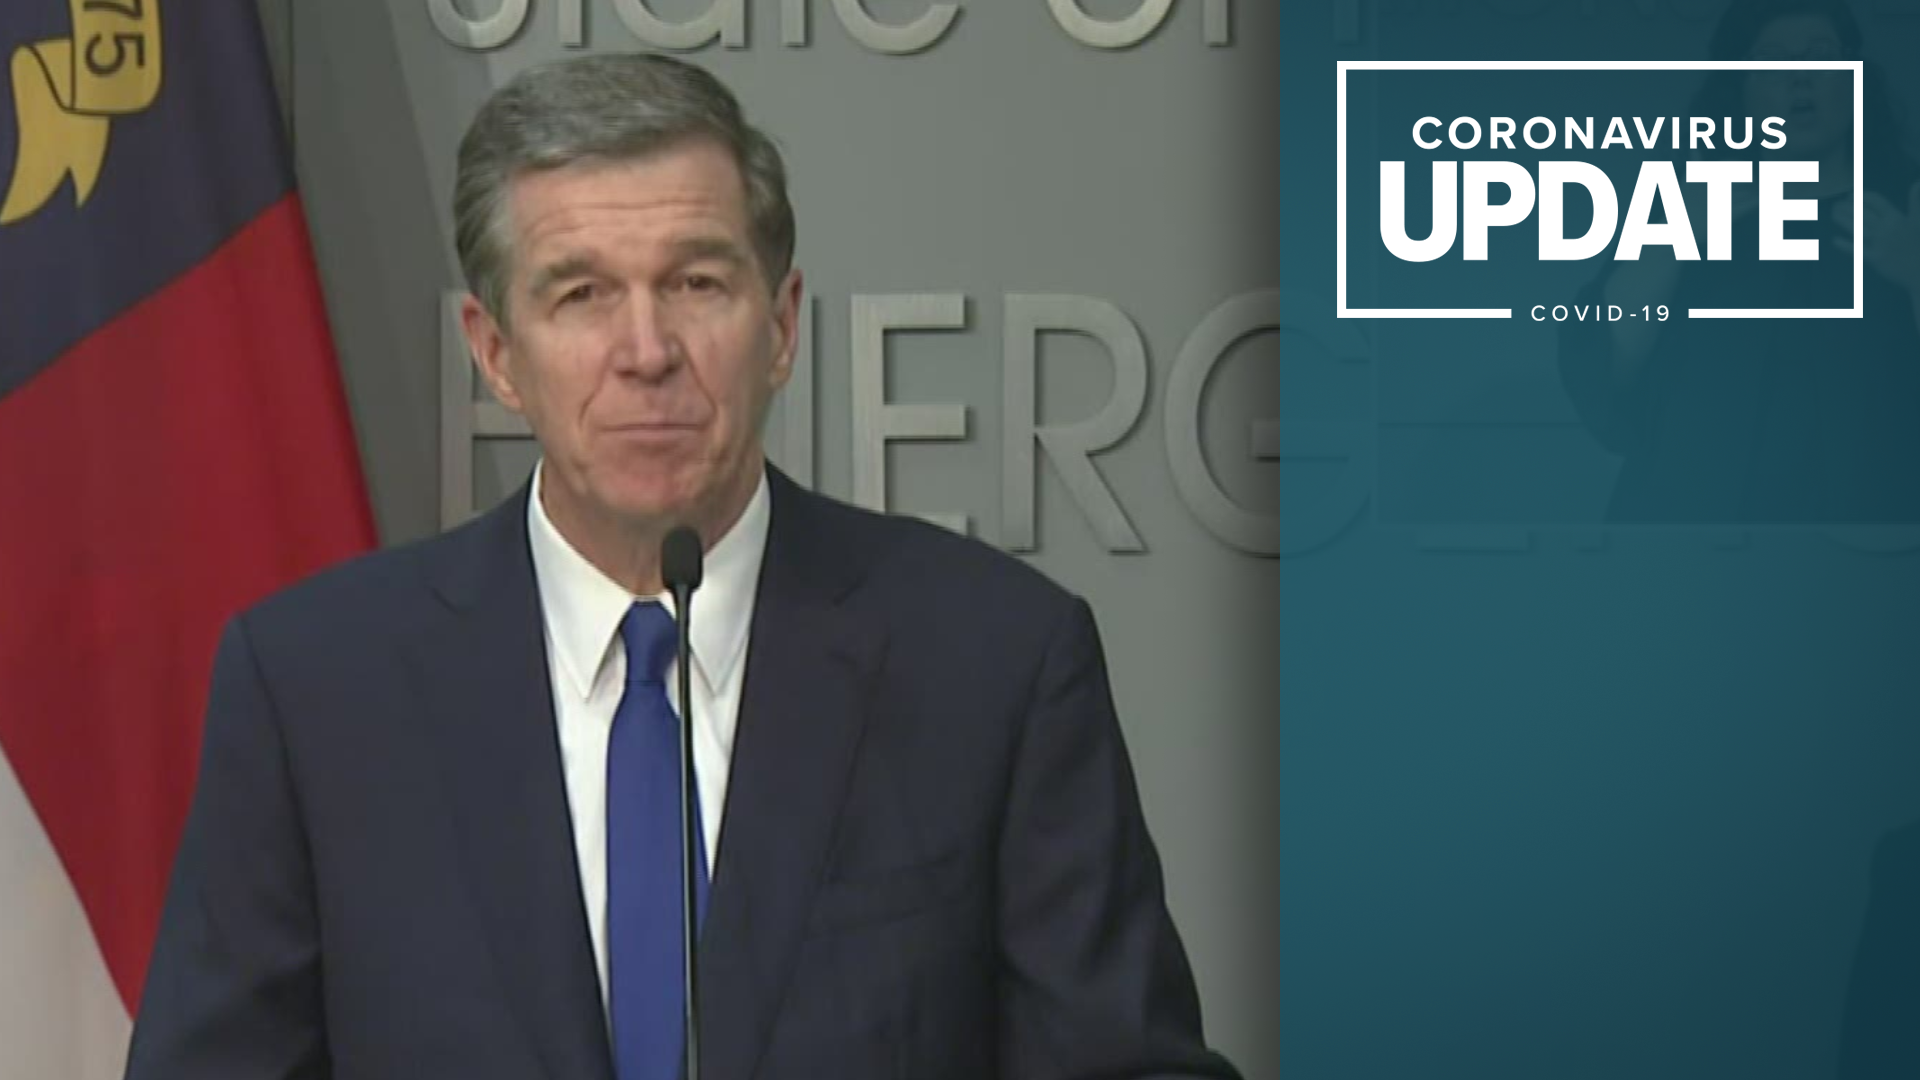 North Carolina Governor Roy Cooper issued a statewide stay at home order Friday effective Monday at 5 p.m.